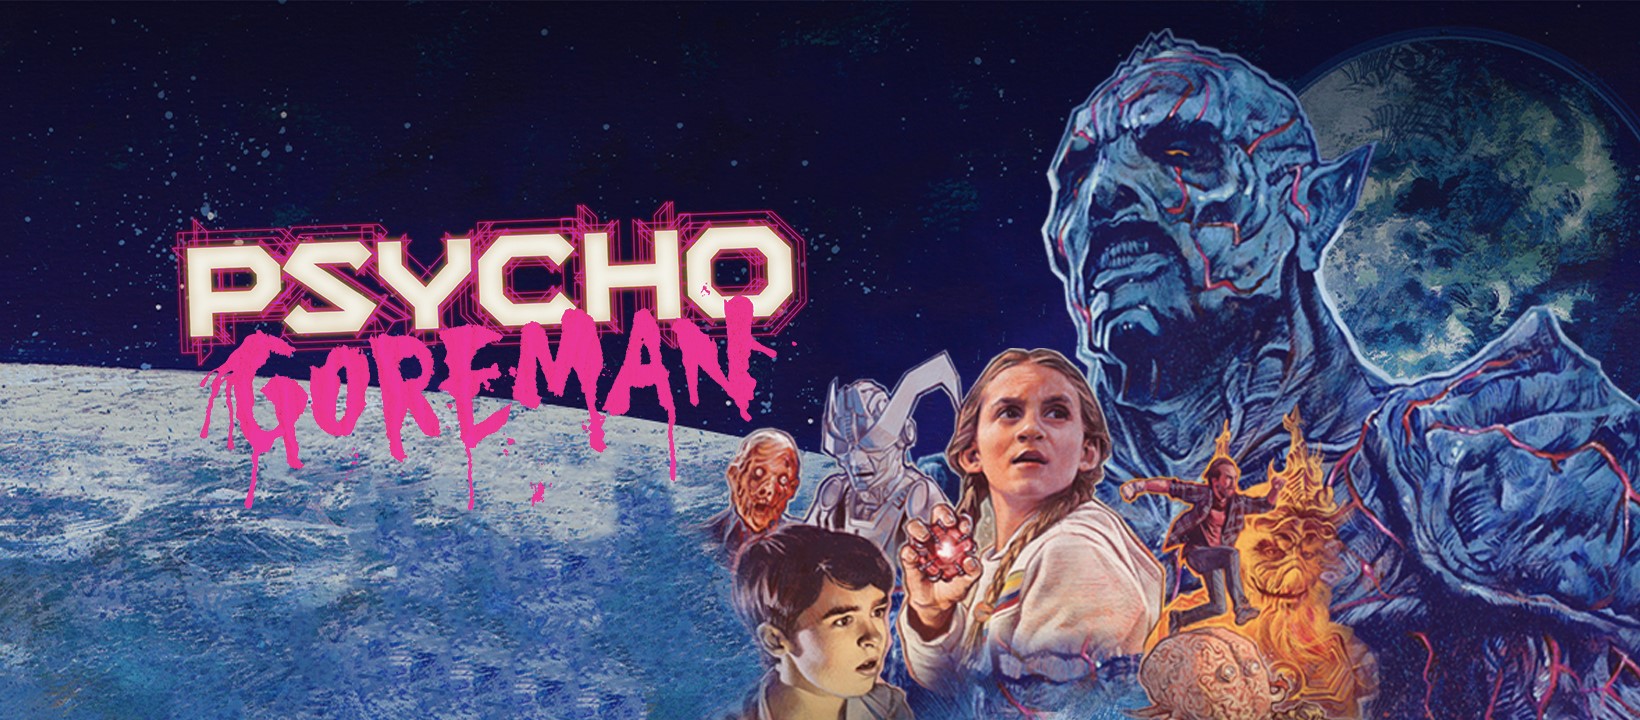 Hunky Boys and Horror Movies: An Interview With PSYCHO GOREMAN  Writer/Director Steven Kostanski - Cinepunx